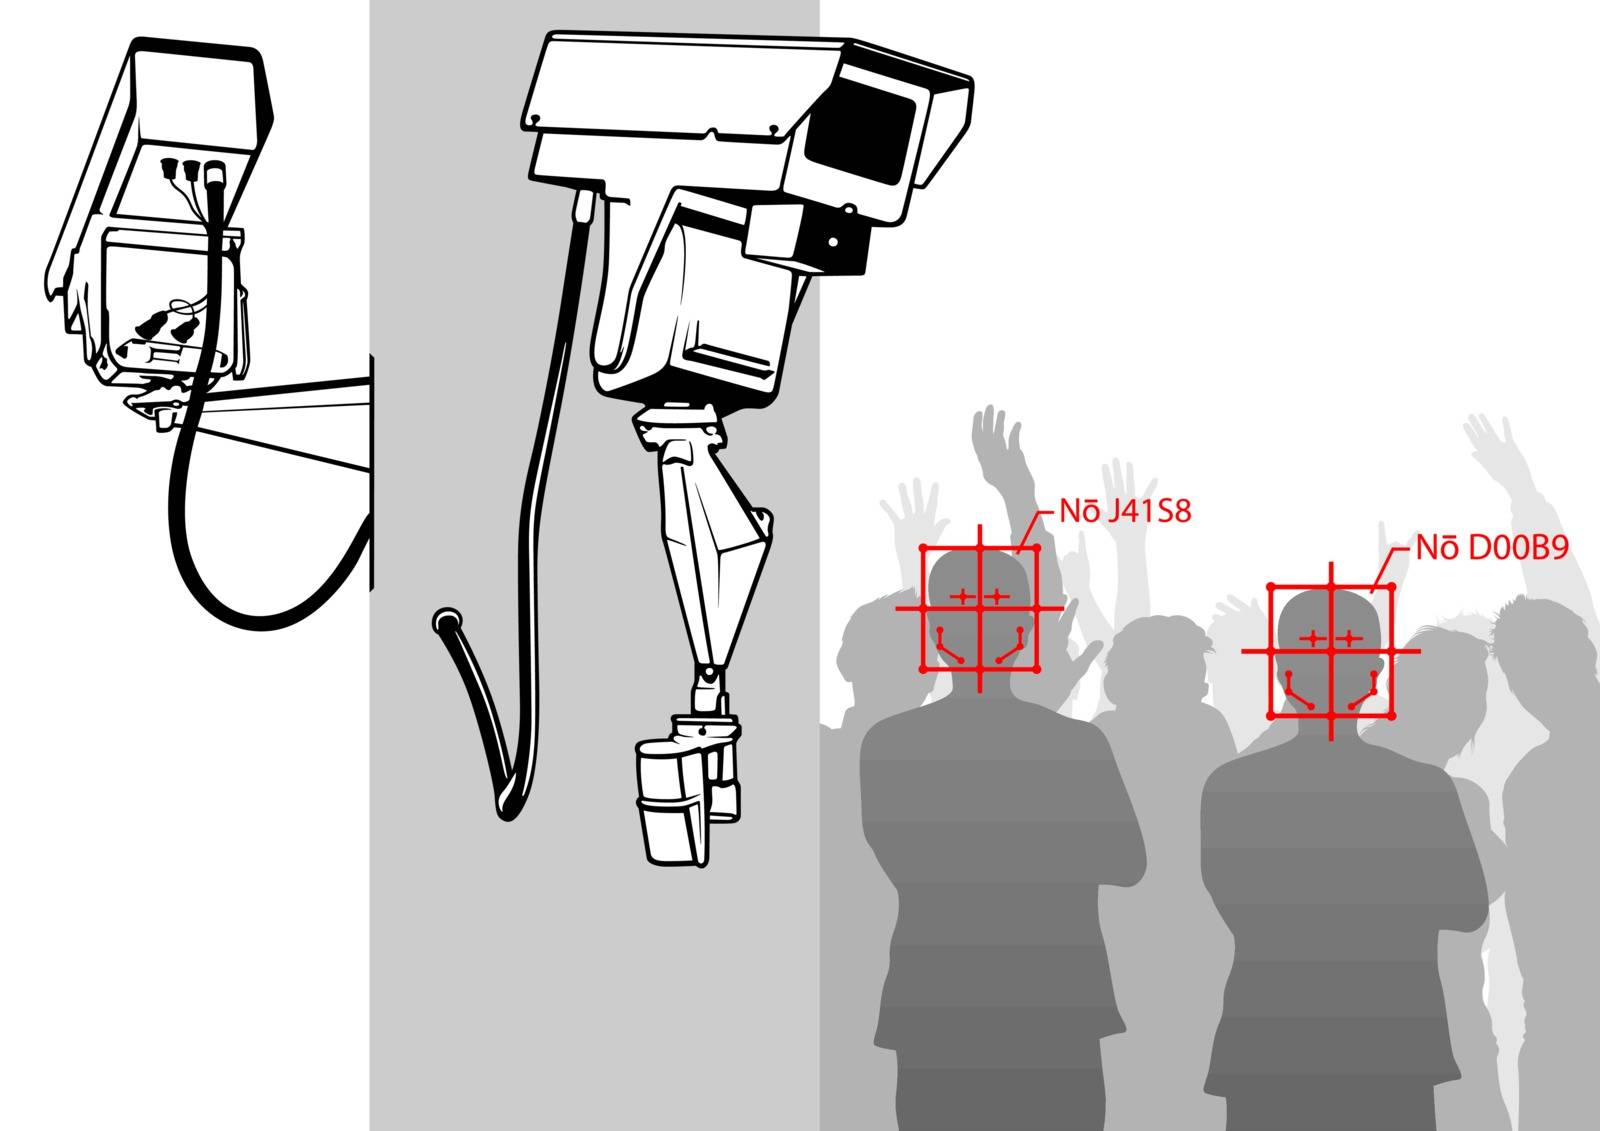 Face Detection with Camera System - CCTV Surveillance Security Camera Video Equipment on Pole Outdoor Building Safety System Area Control - Vector Illustration